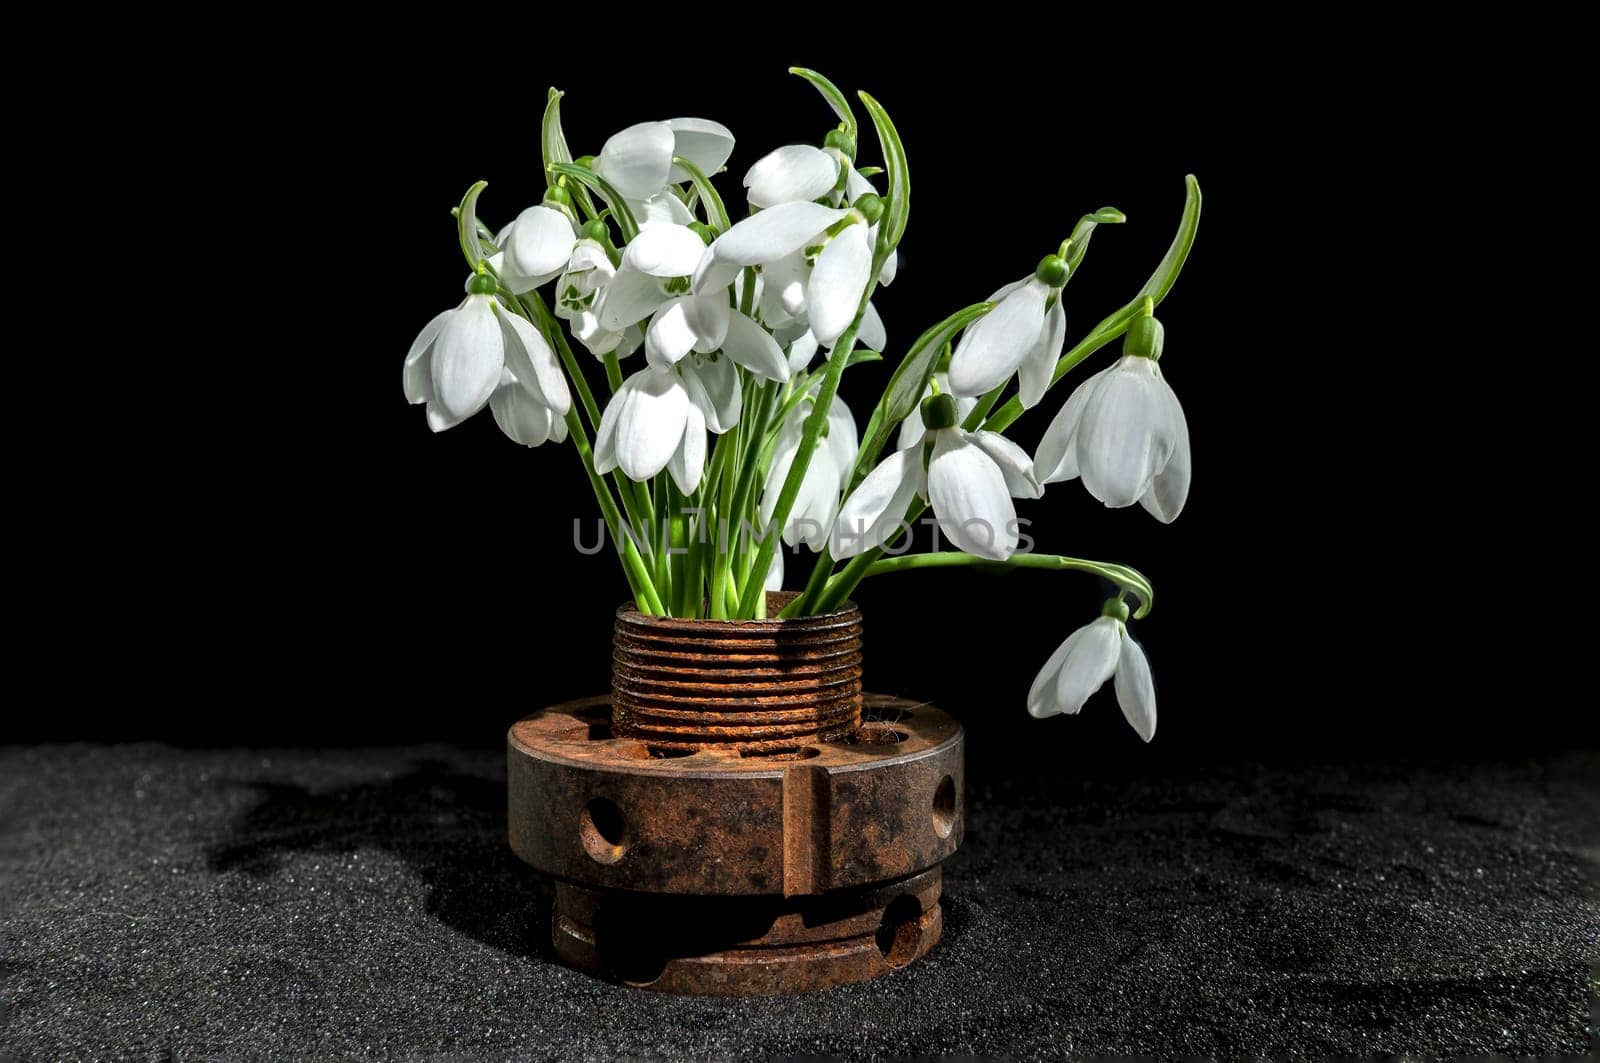 Old rusty metal tool and white snowdrops on a black background by Multipedia